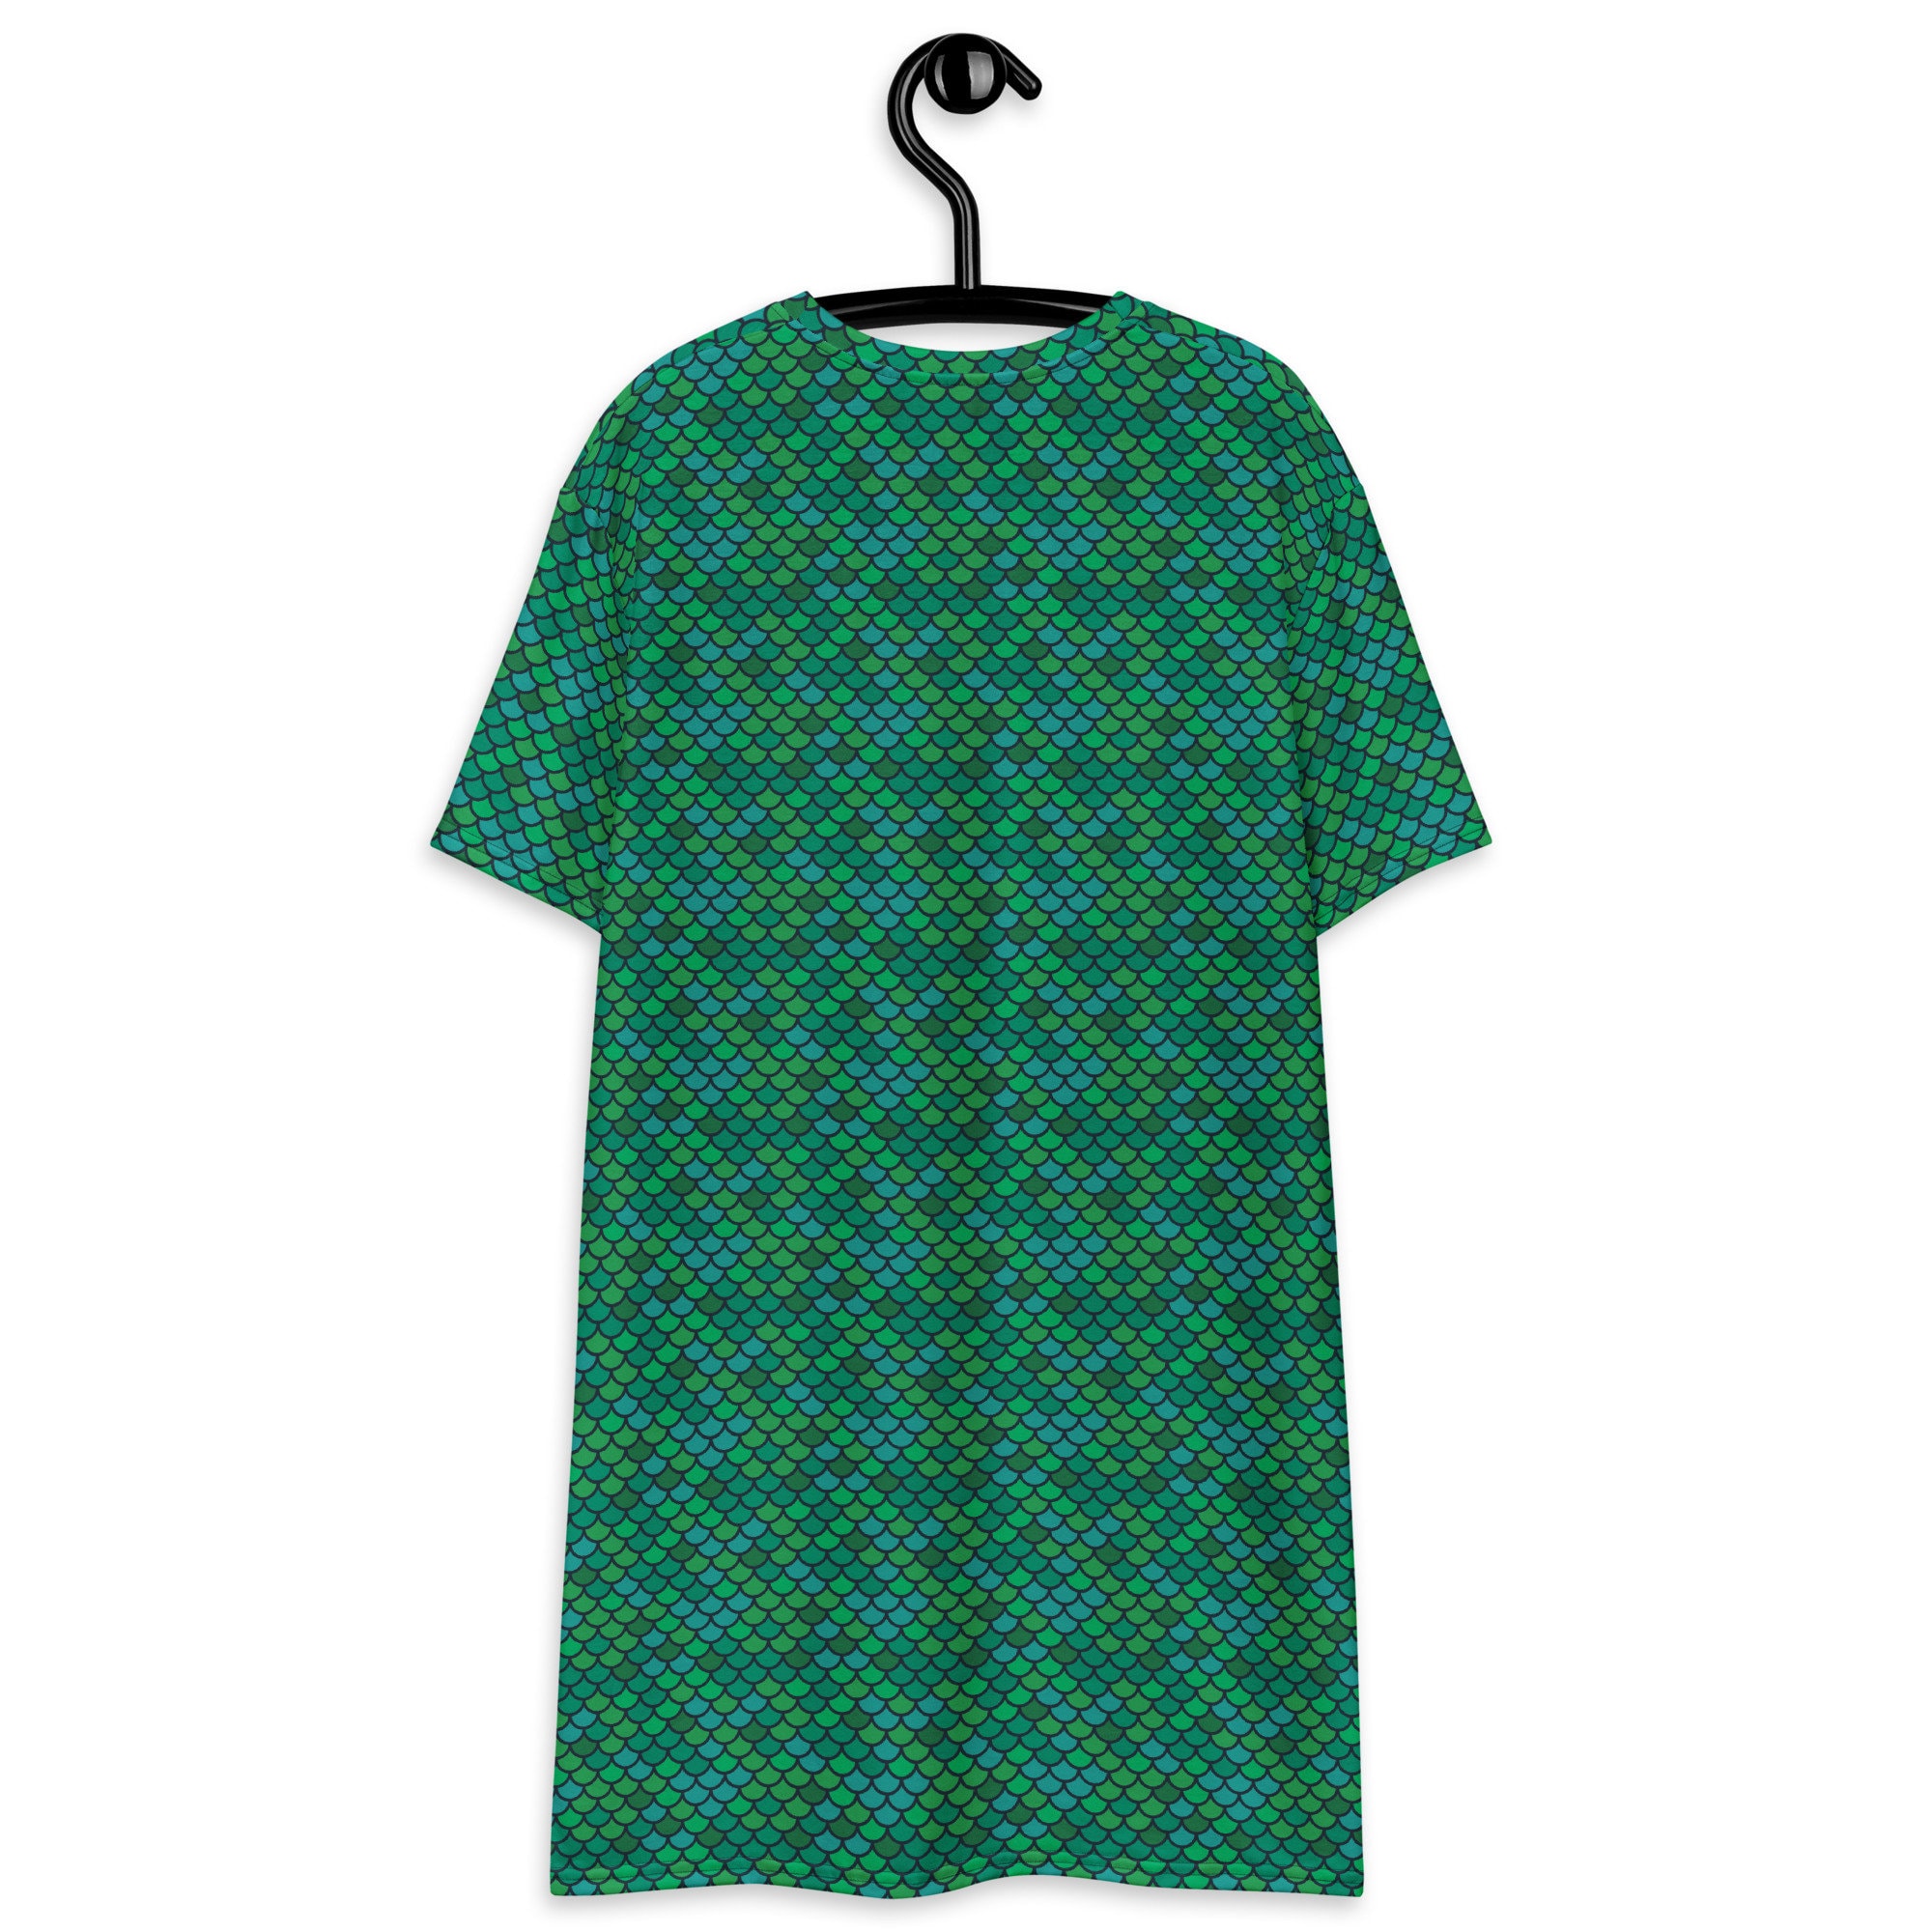 Discover Green Mermaid T-Shirt Dress for Women Fish Scales Pattern Print Plus Size Available Drop Shoulders Comfy Relaxed Oversized Fit